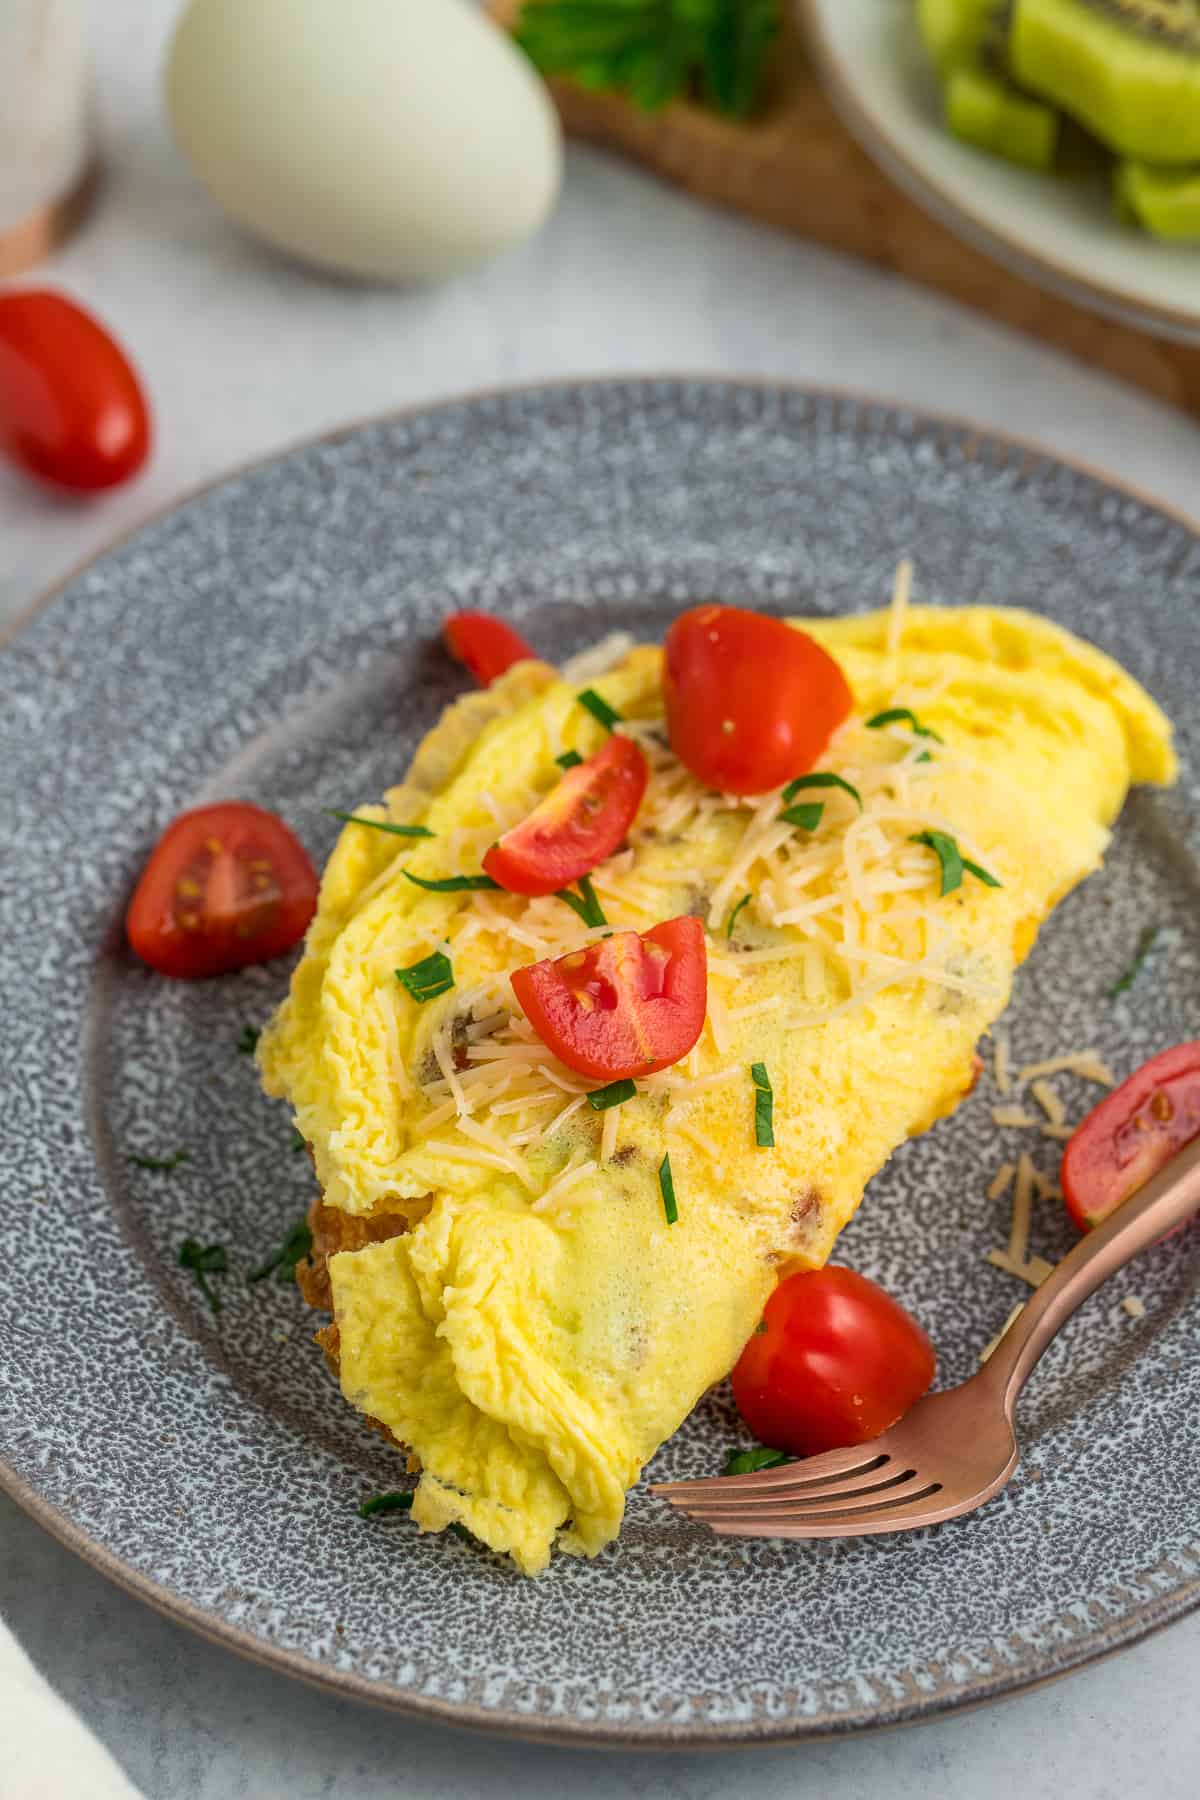 How To Make Air Fryer Omelette